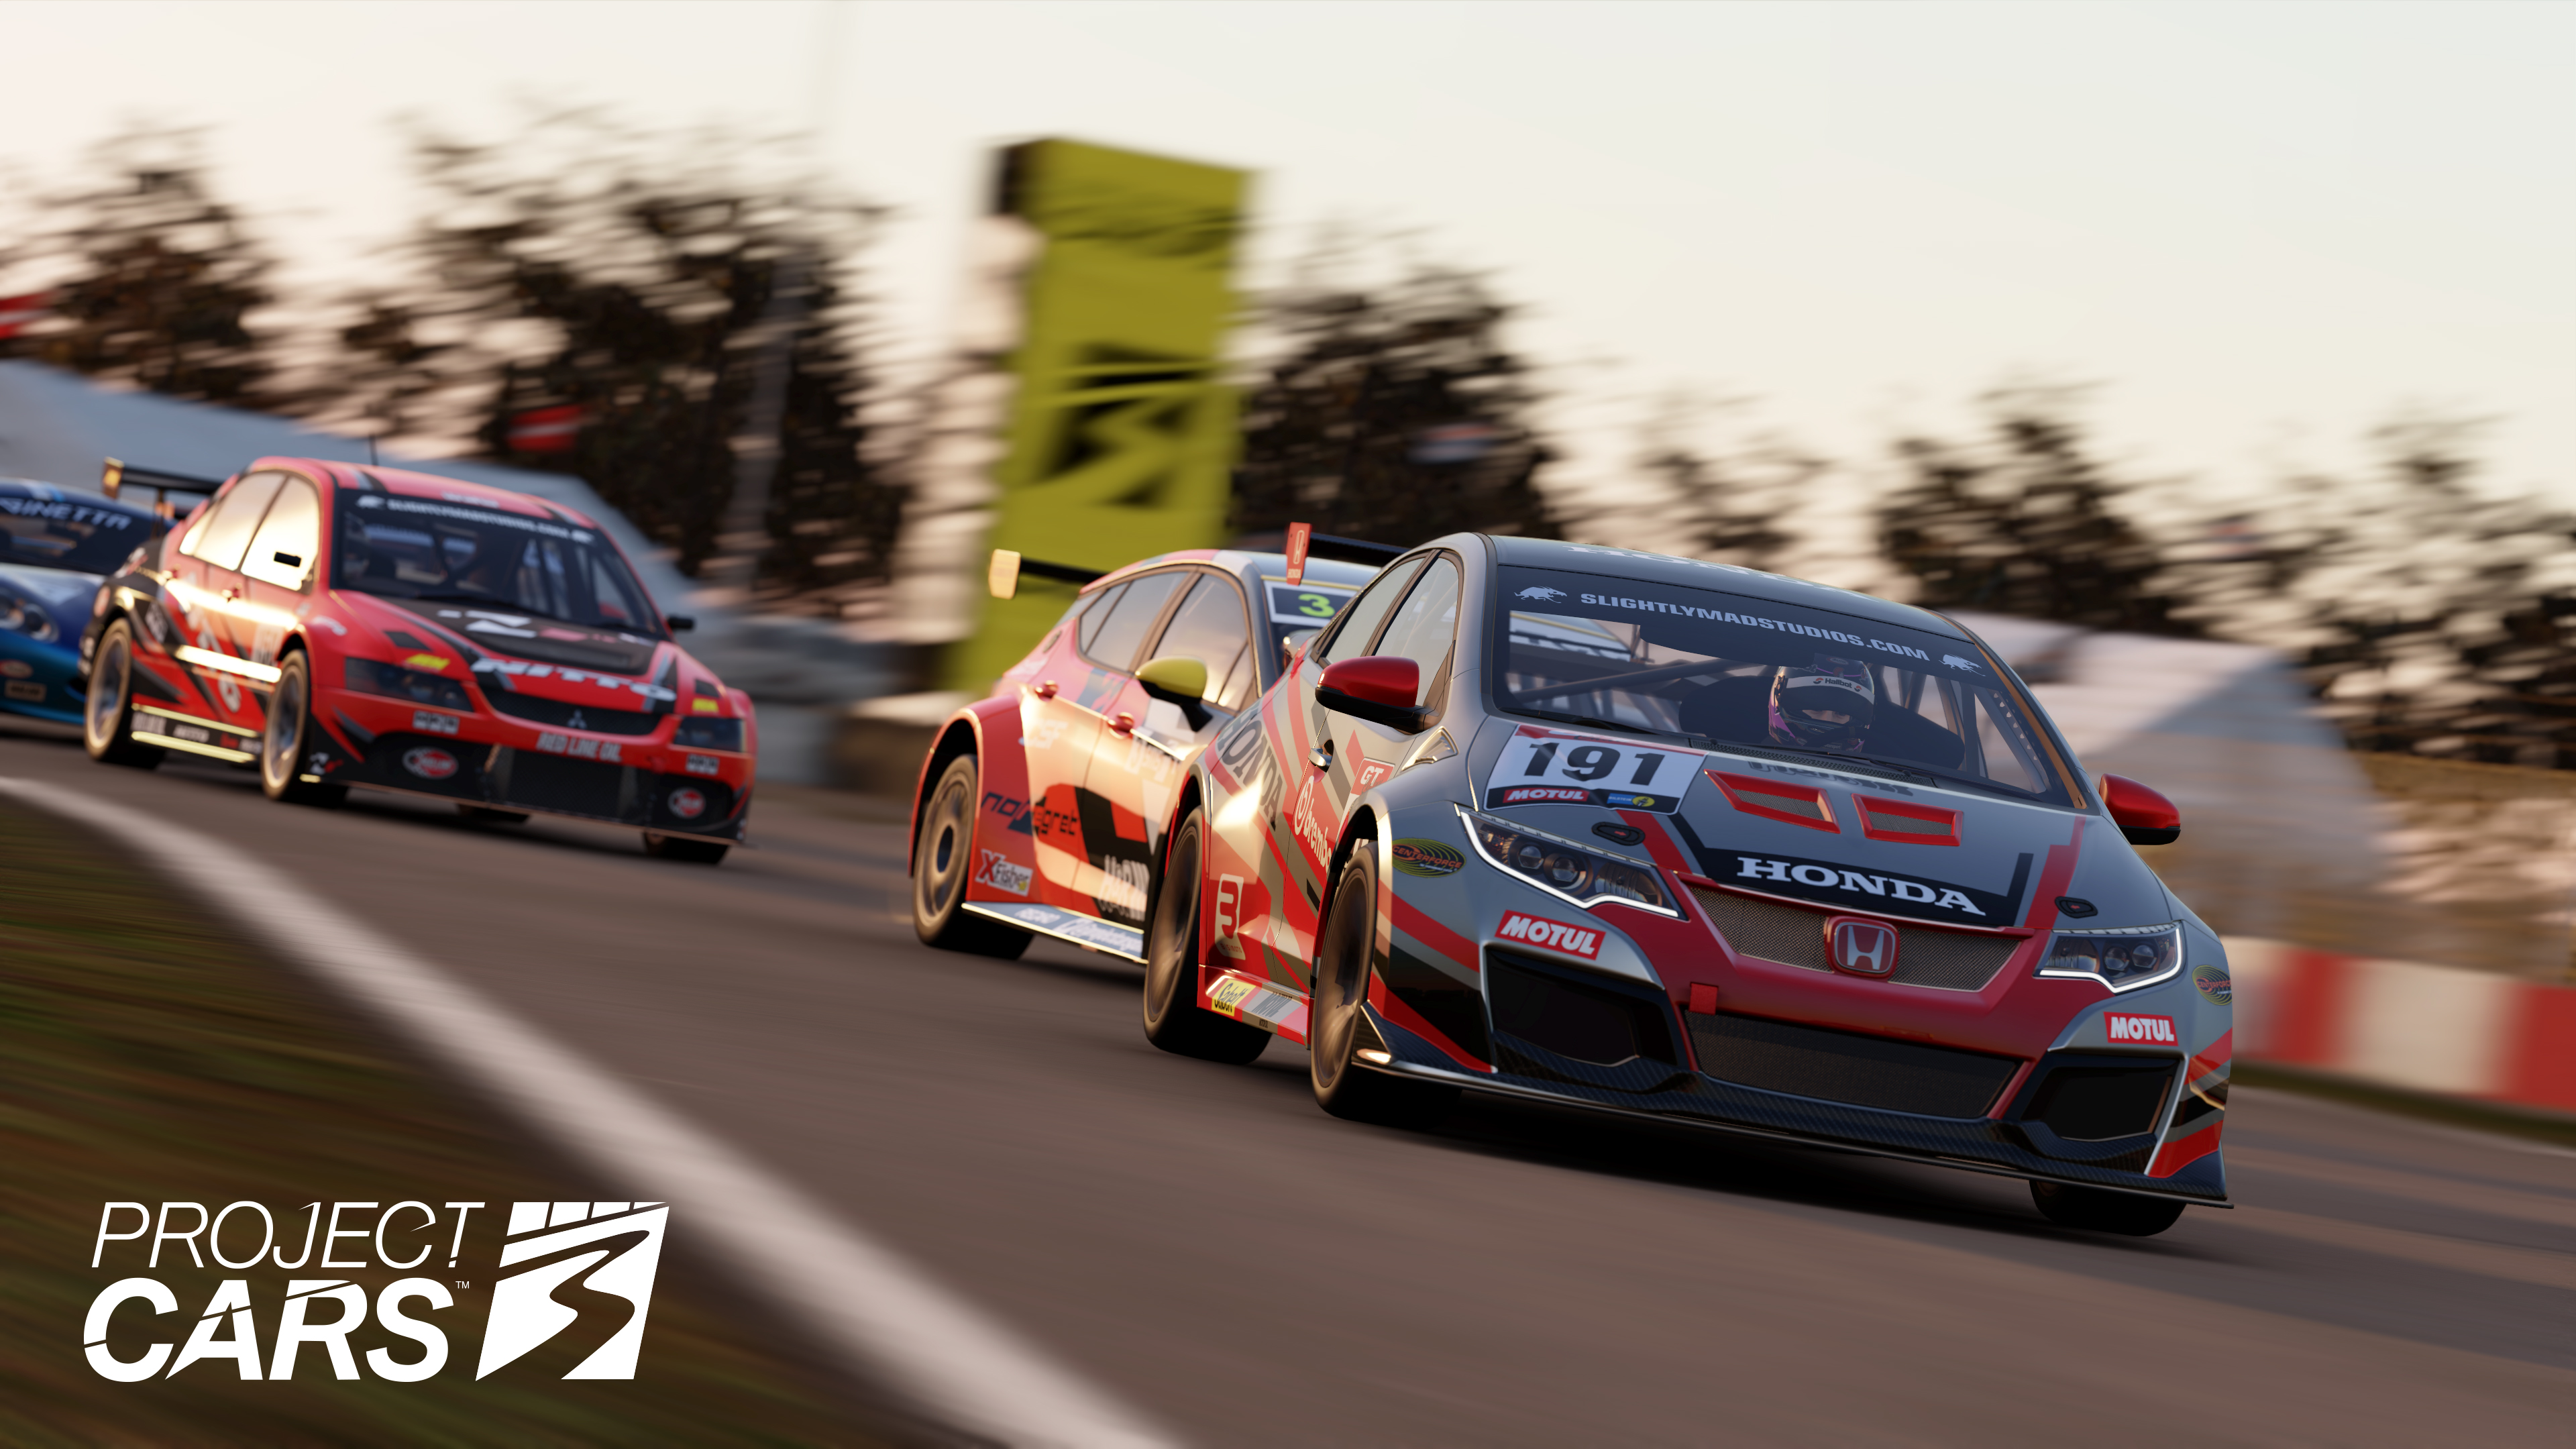 metacritic Twitter: "Project Cars 3 [PS4 - 78] Power Unlimited: "This is a fun arcade-style racer with a little more depth than normal arcade racers. But as a